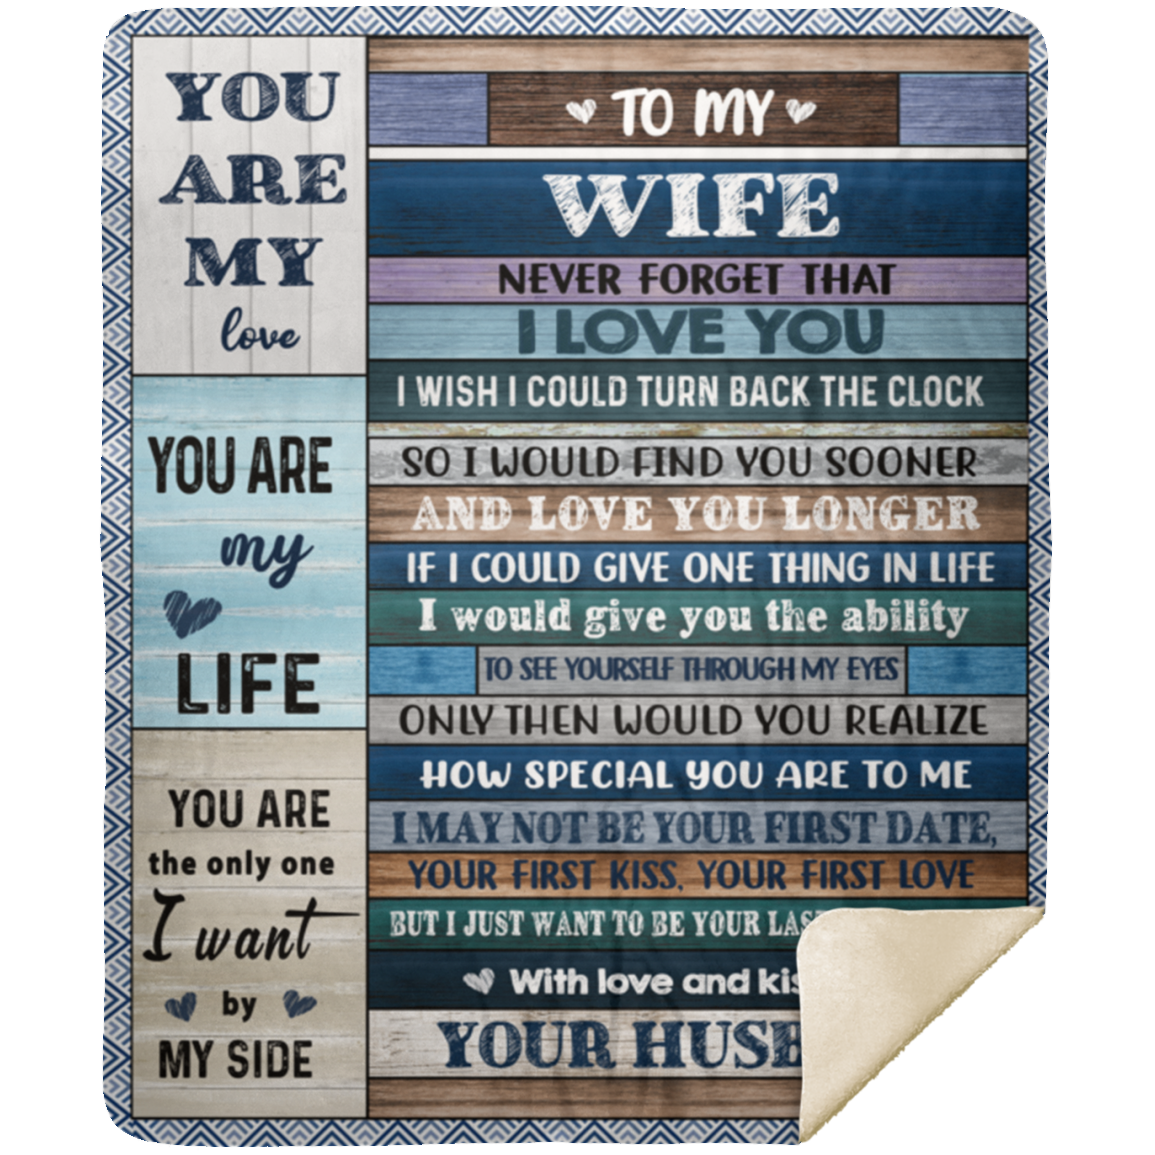 TO MY WIFE| NEVER FORGET THAT I LOVE YOU| Premium Plush Blanket